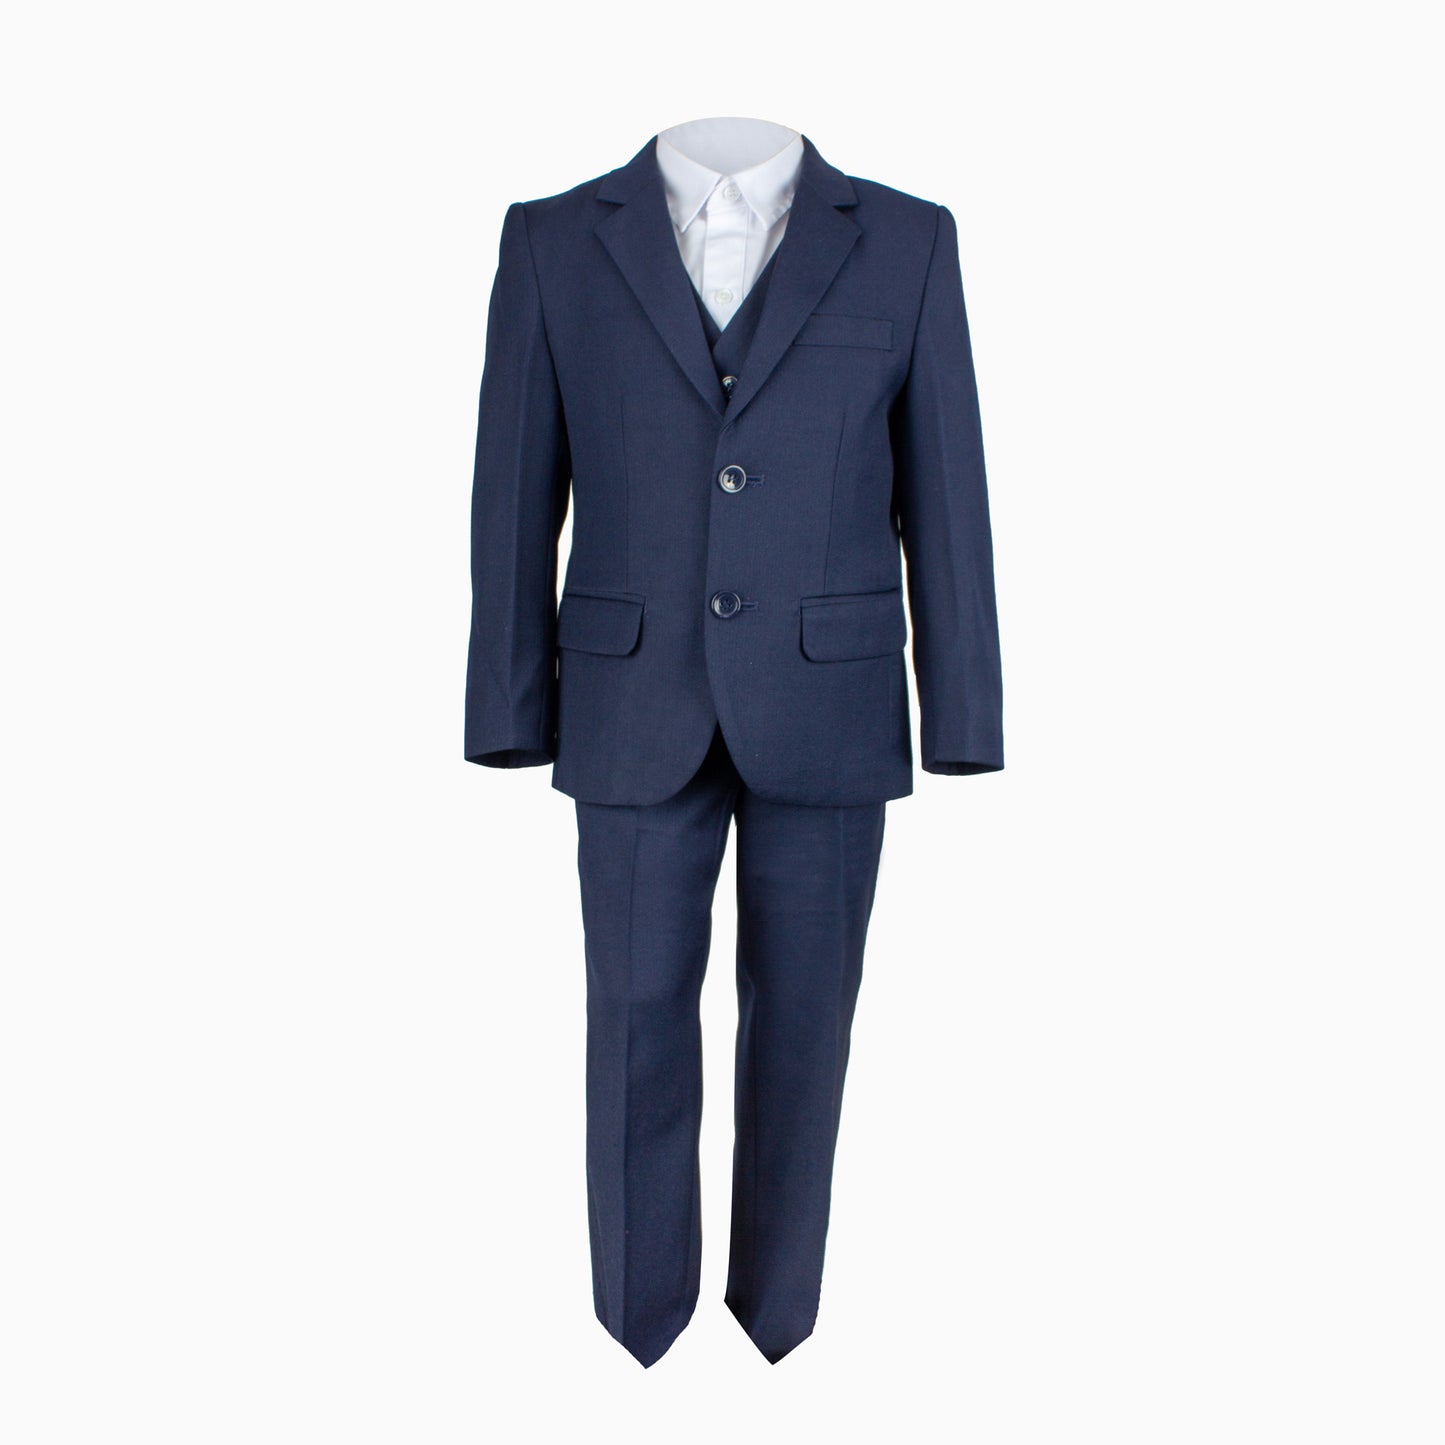 Boys' Formal Navy Suit, 4 Piece Set (size 3 months to 7 years)